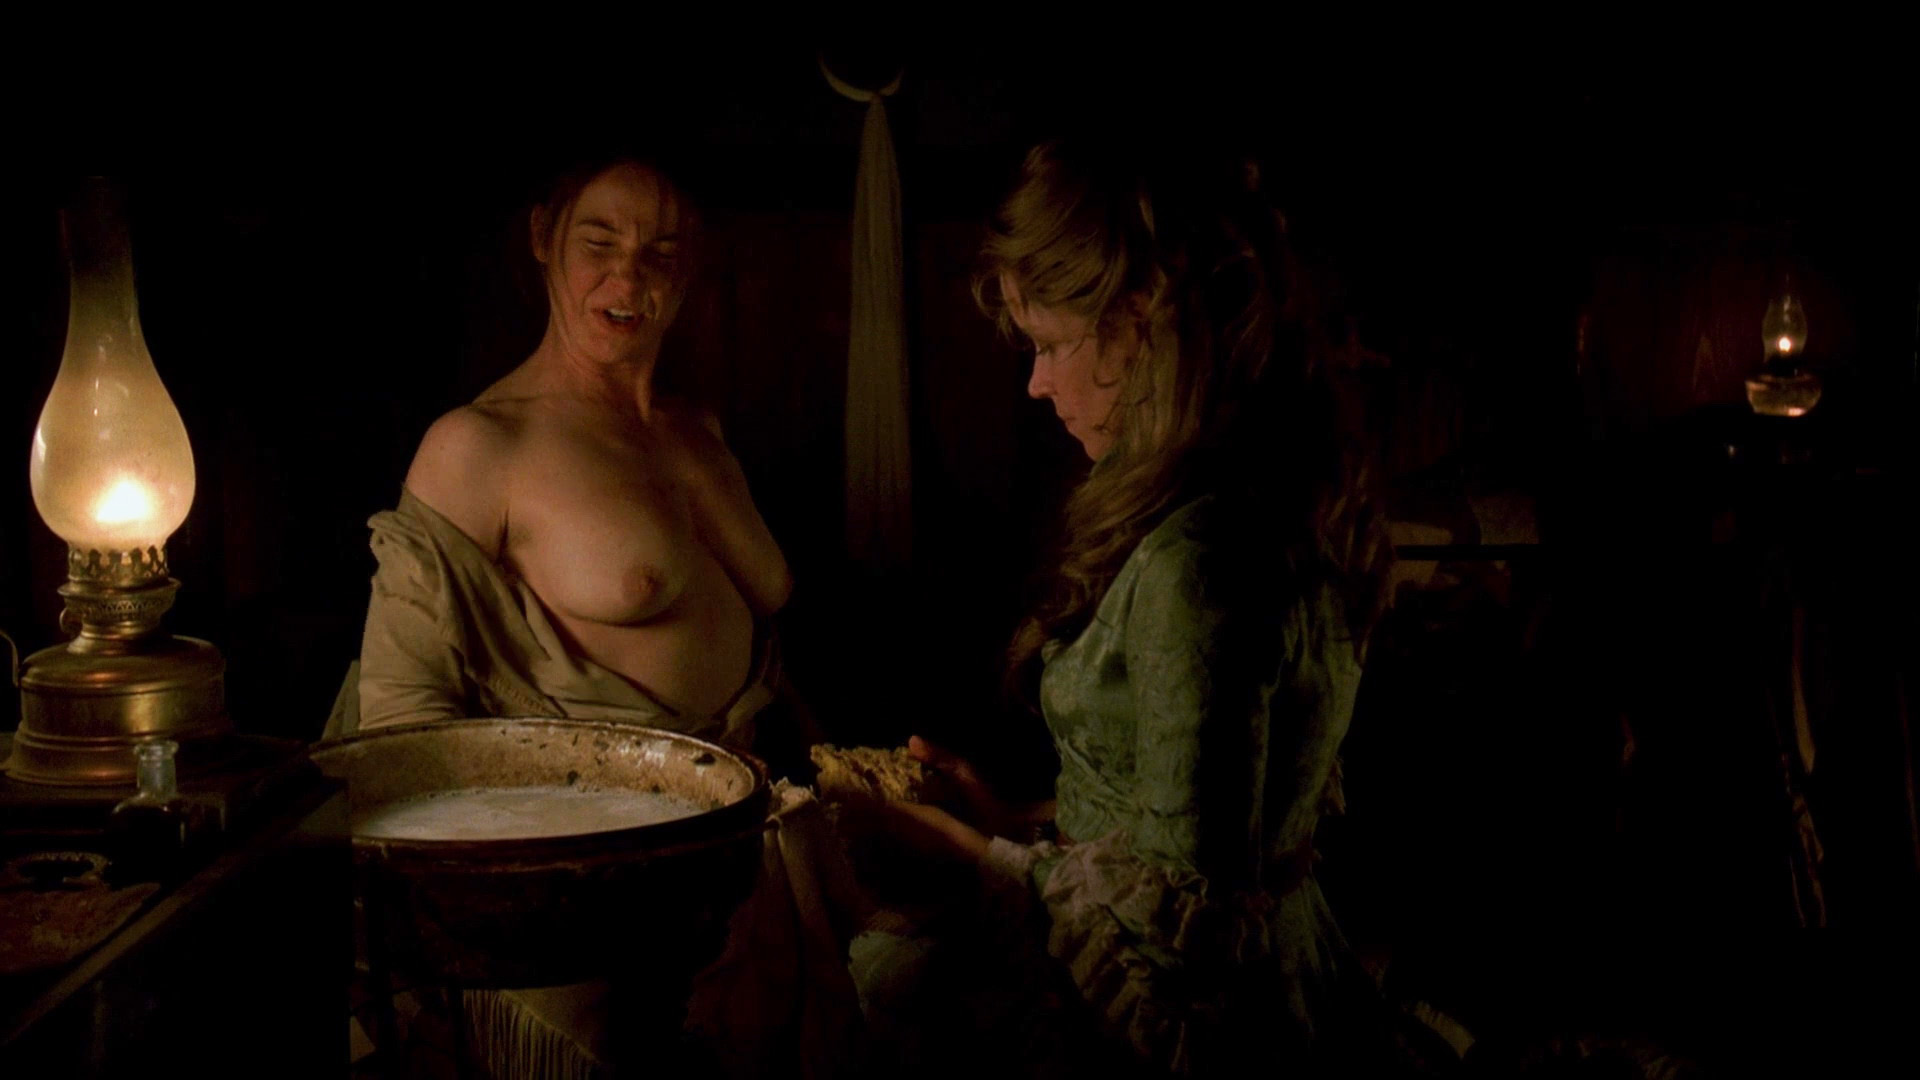 In deadwood nudity I Found